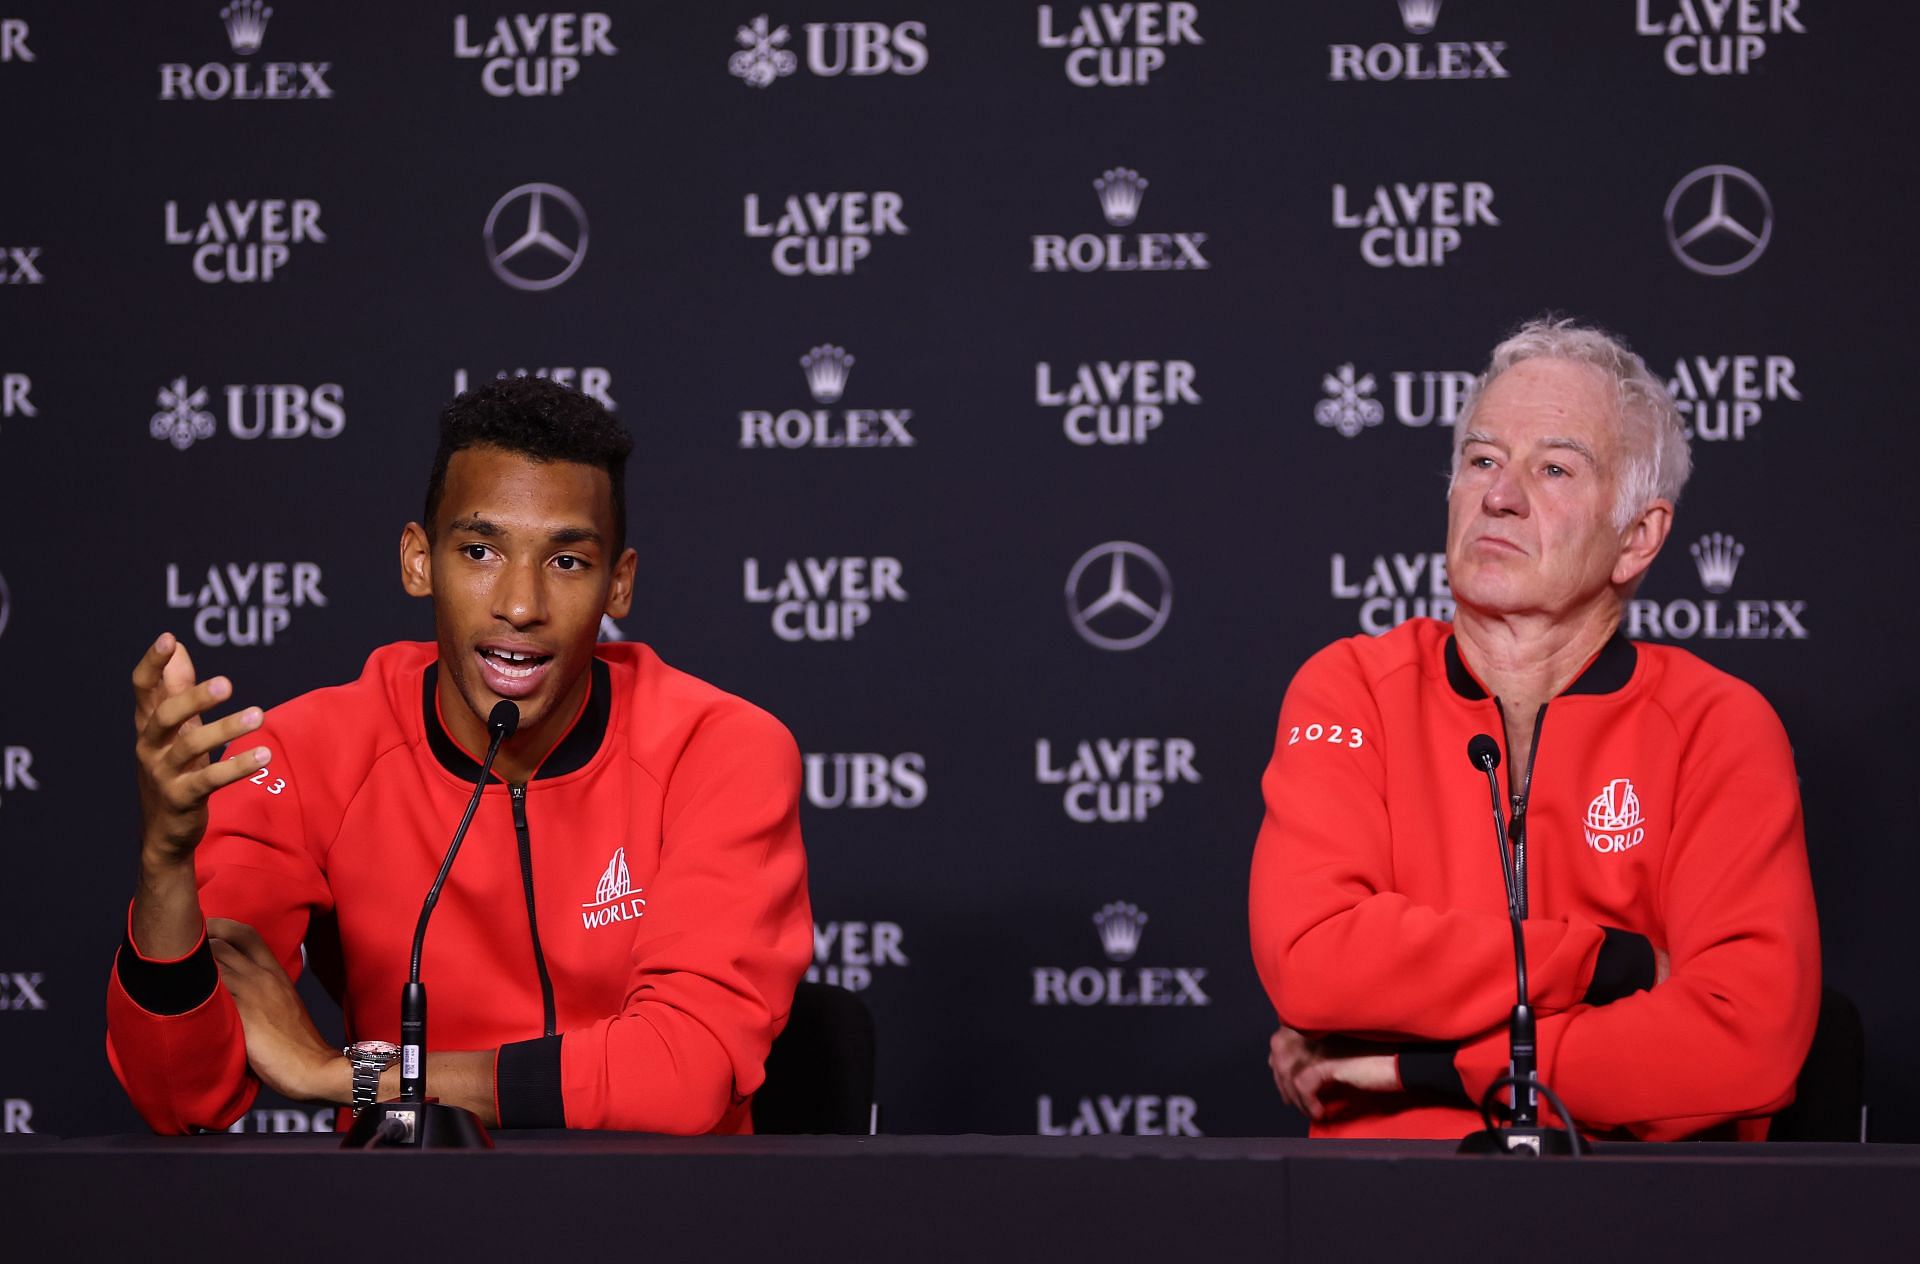 Laver Cup 2023 - Day 2